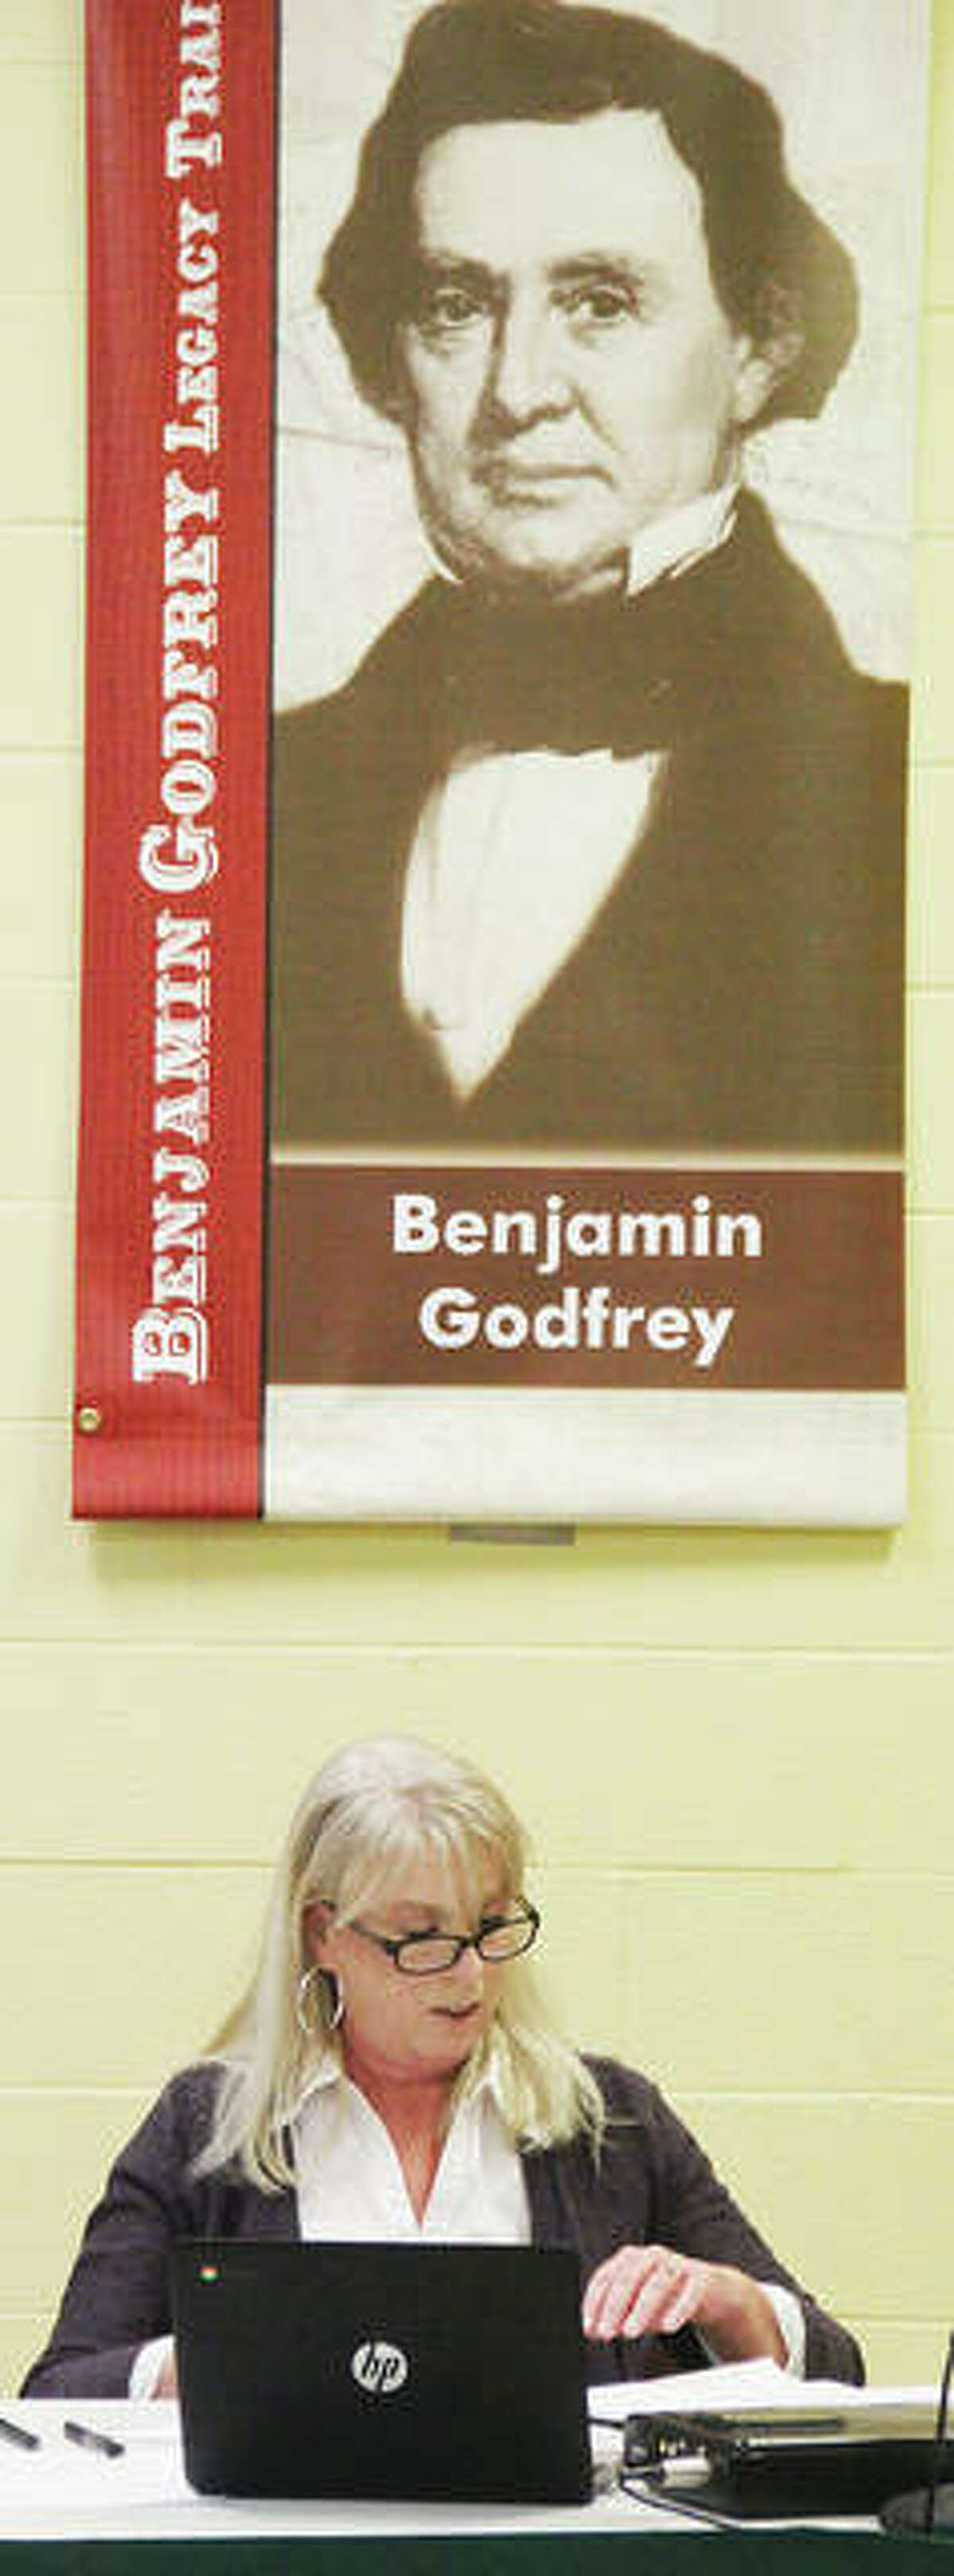 New Godfrey Village Clerk Bethany Bohn sits under a banner for town namesake Benjamin Godfrey after been sworn in at Tuesday’s Village Board meeting. She replaces long-time clerk Pam Whisler, who retired in December and had been the only person to hold the position until Tuesday.